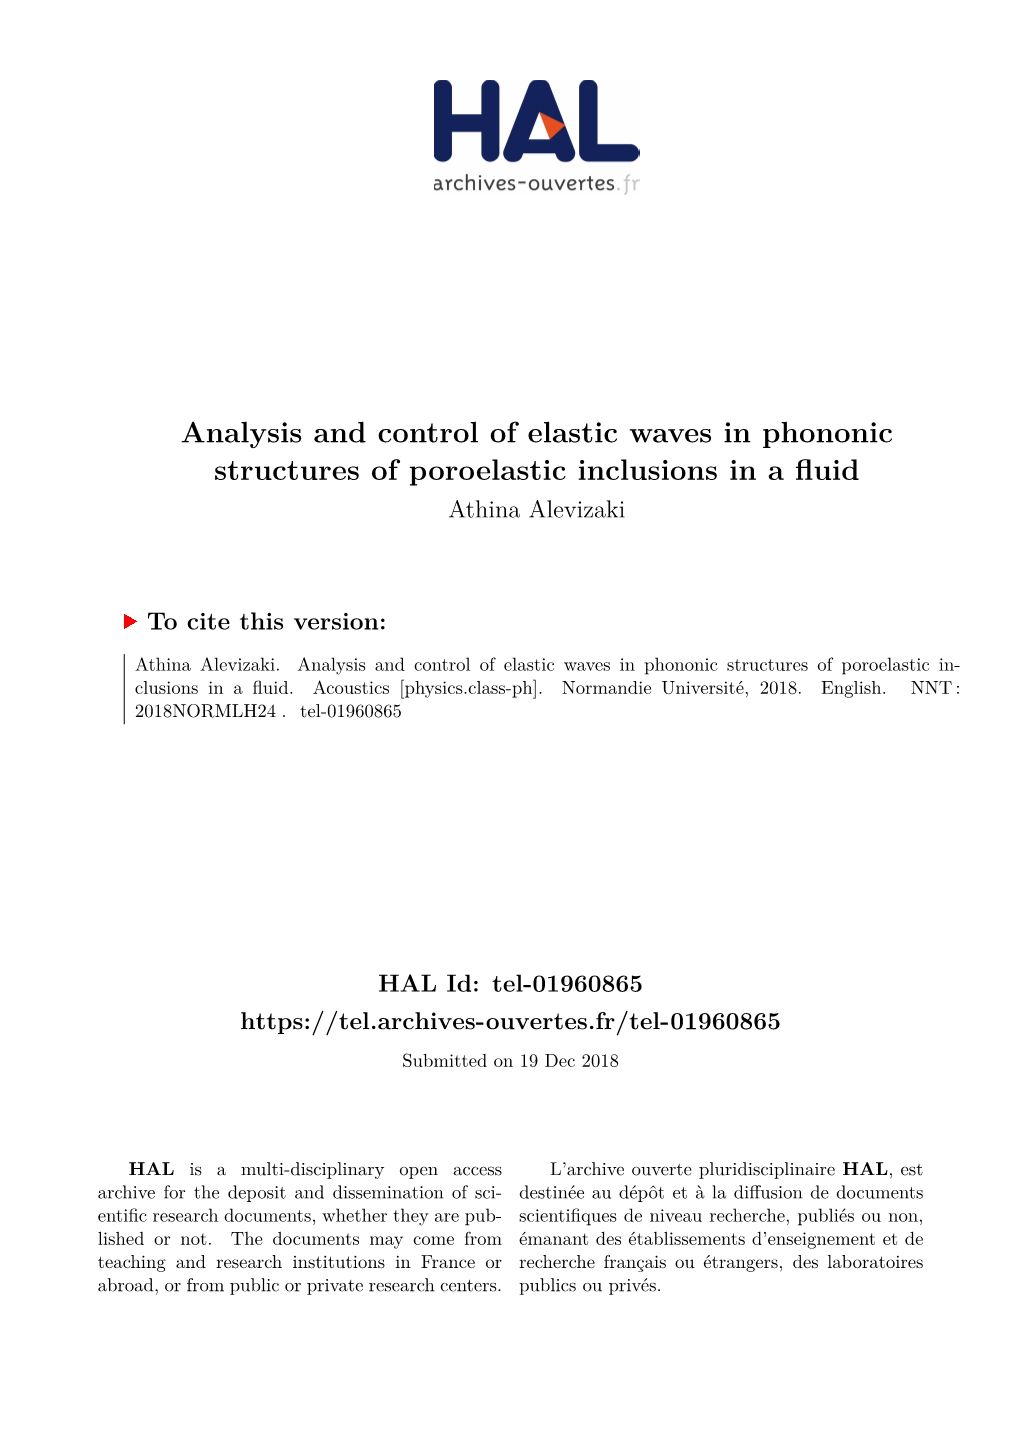 Analysis and Control of Elastic Waves in Phononic Structures of Poroelastic Inclusions in a Fluid Athina Alevizaki